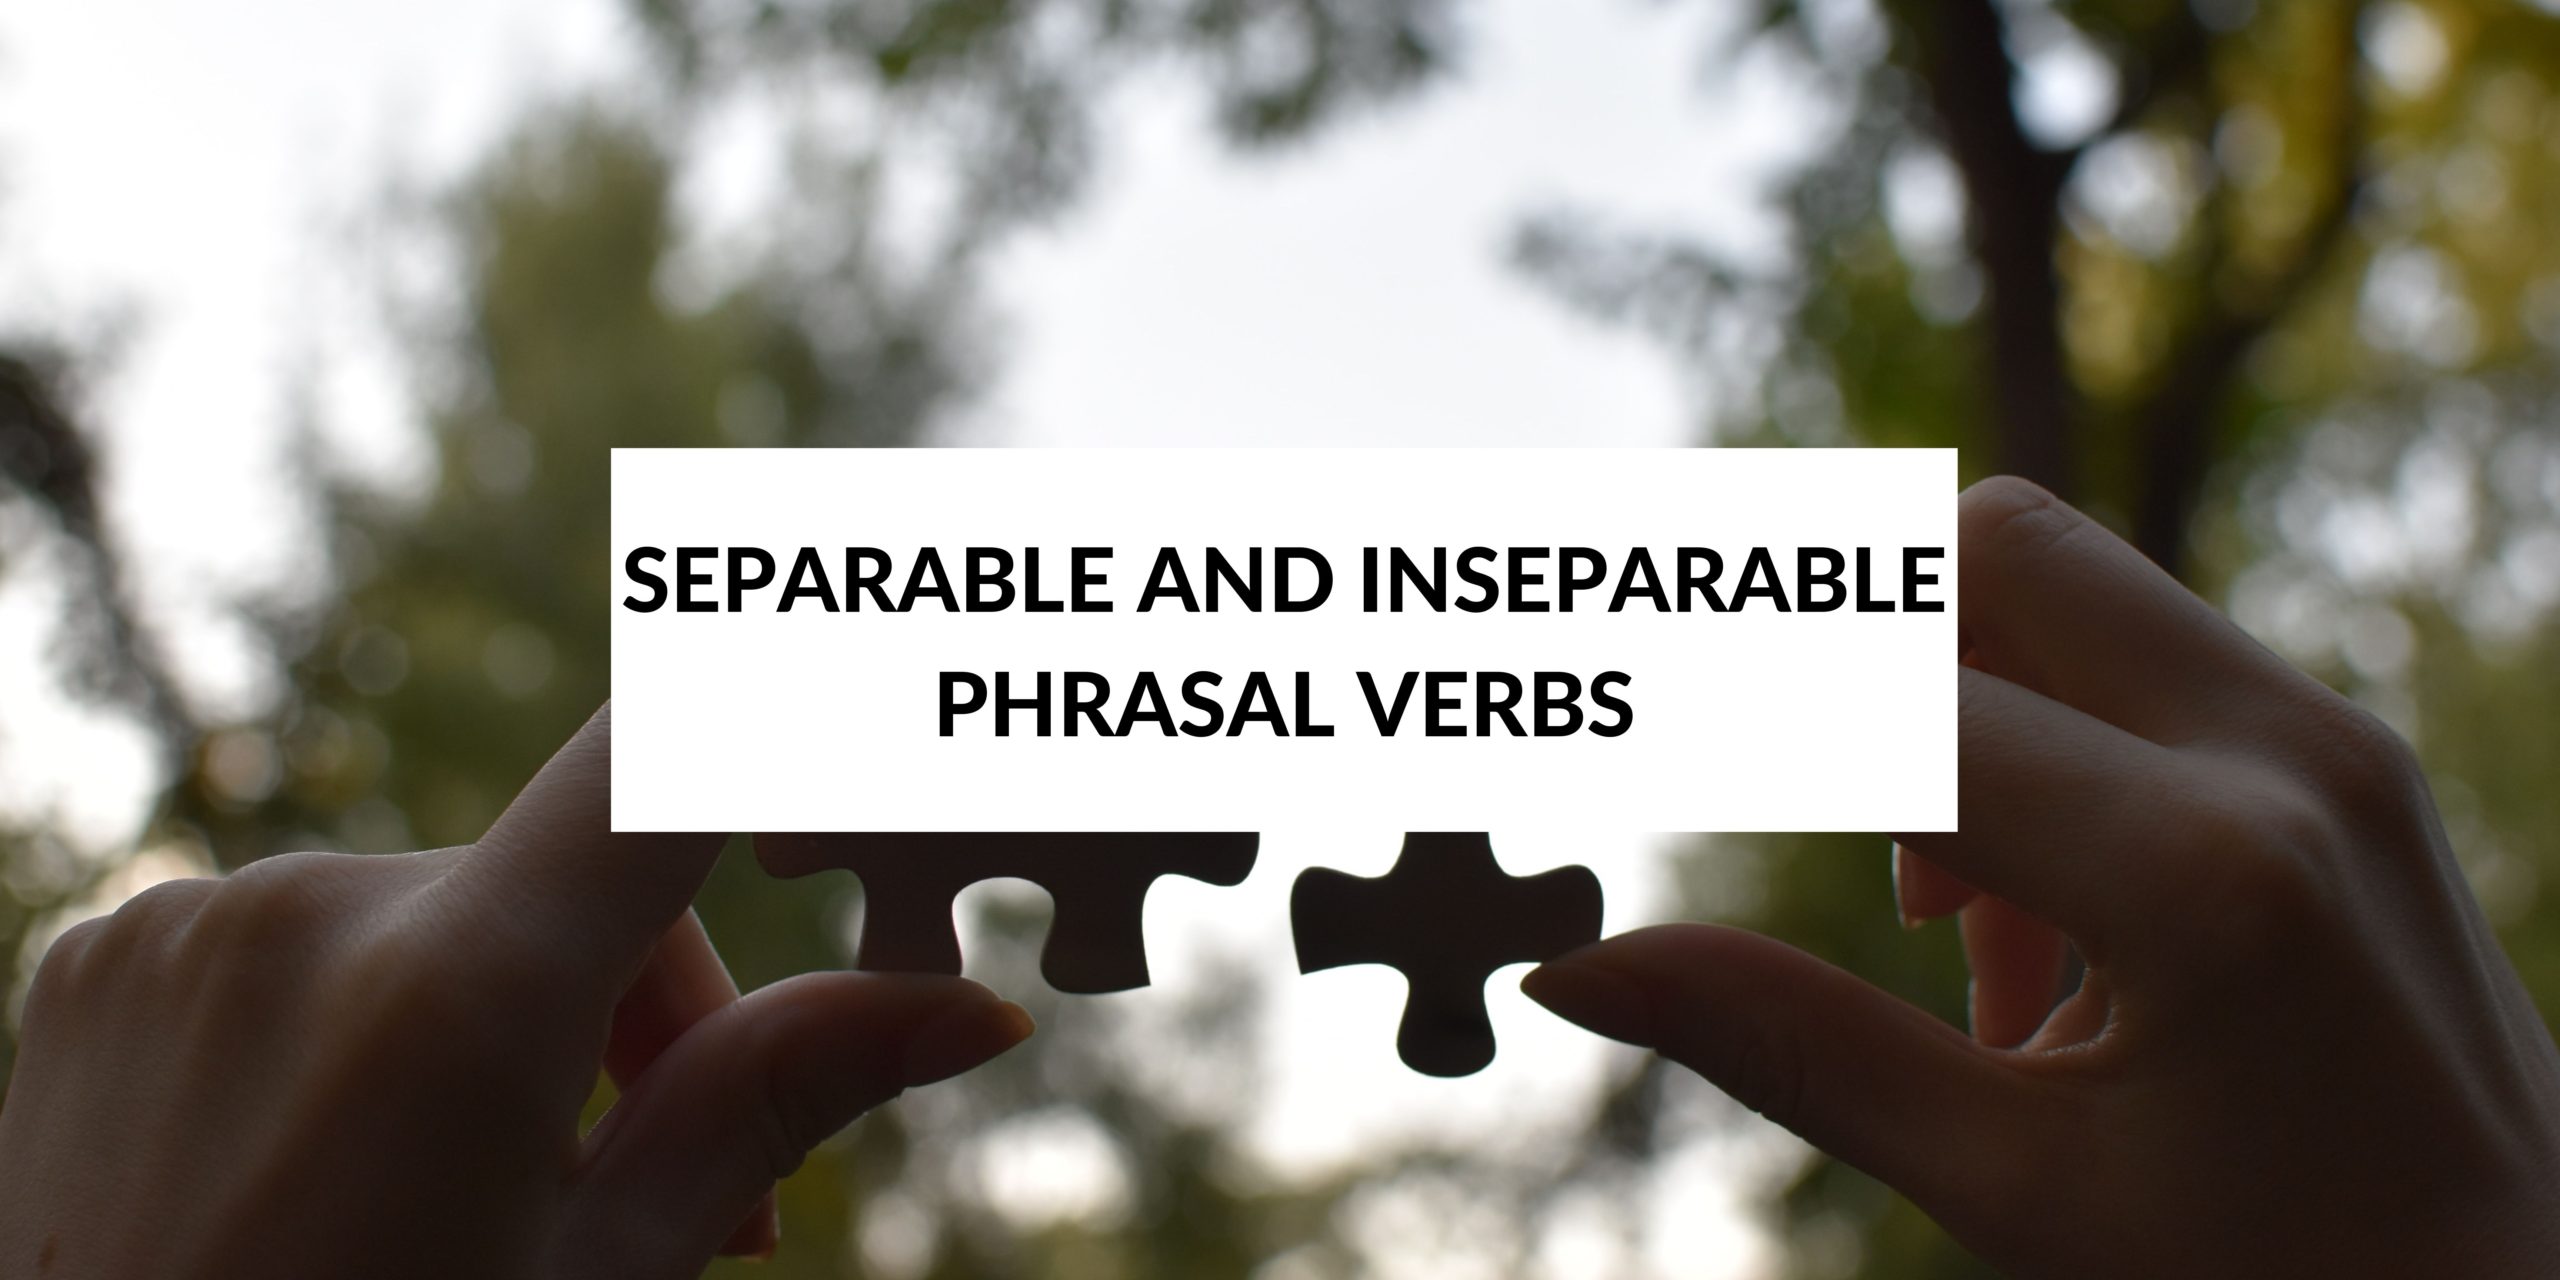 separable-and-inseparable-phrasal-verbs-speak-english-by-yourself